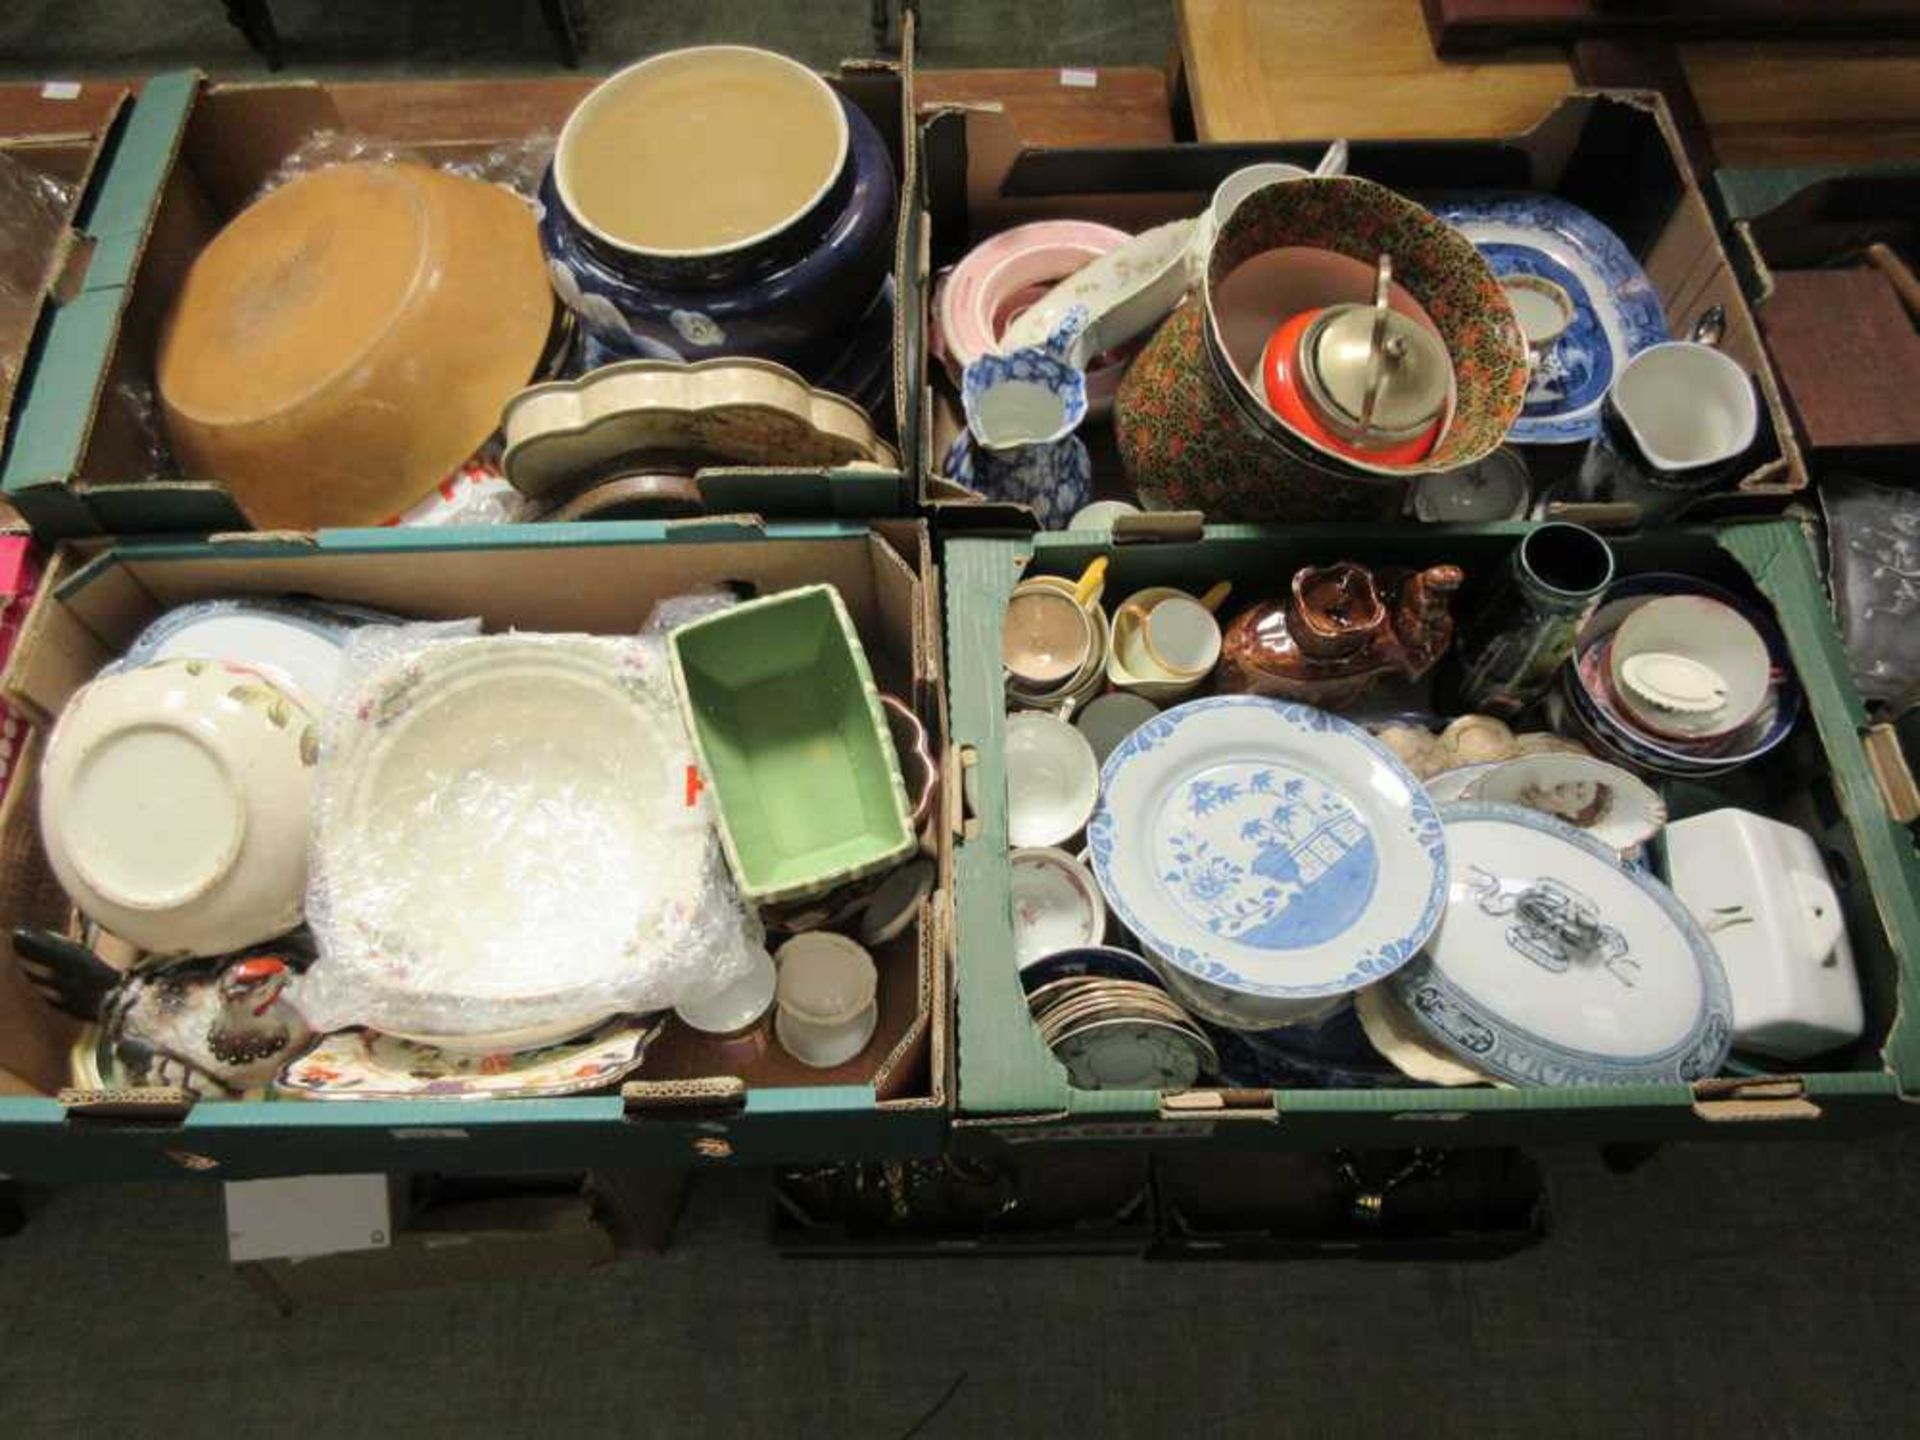 Four trays of decorative ceramic ware to include a cheese dish, planters, blue & white plates etc.